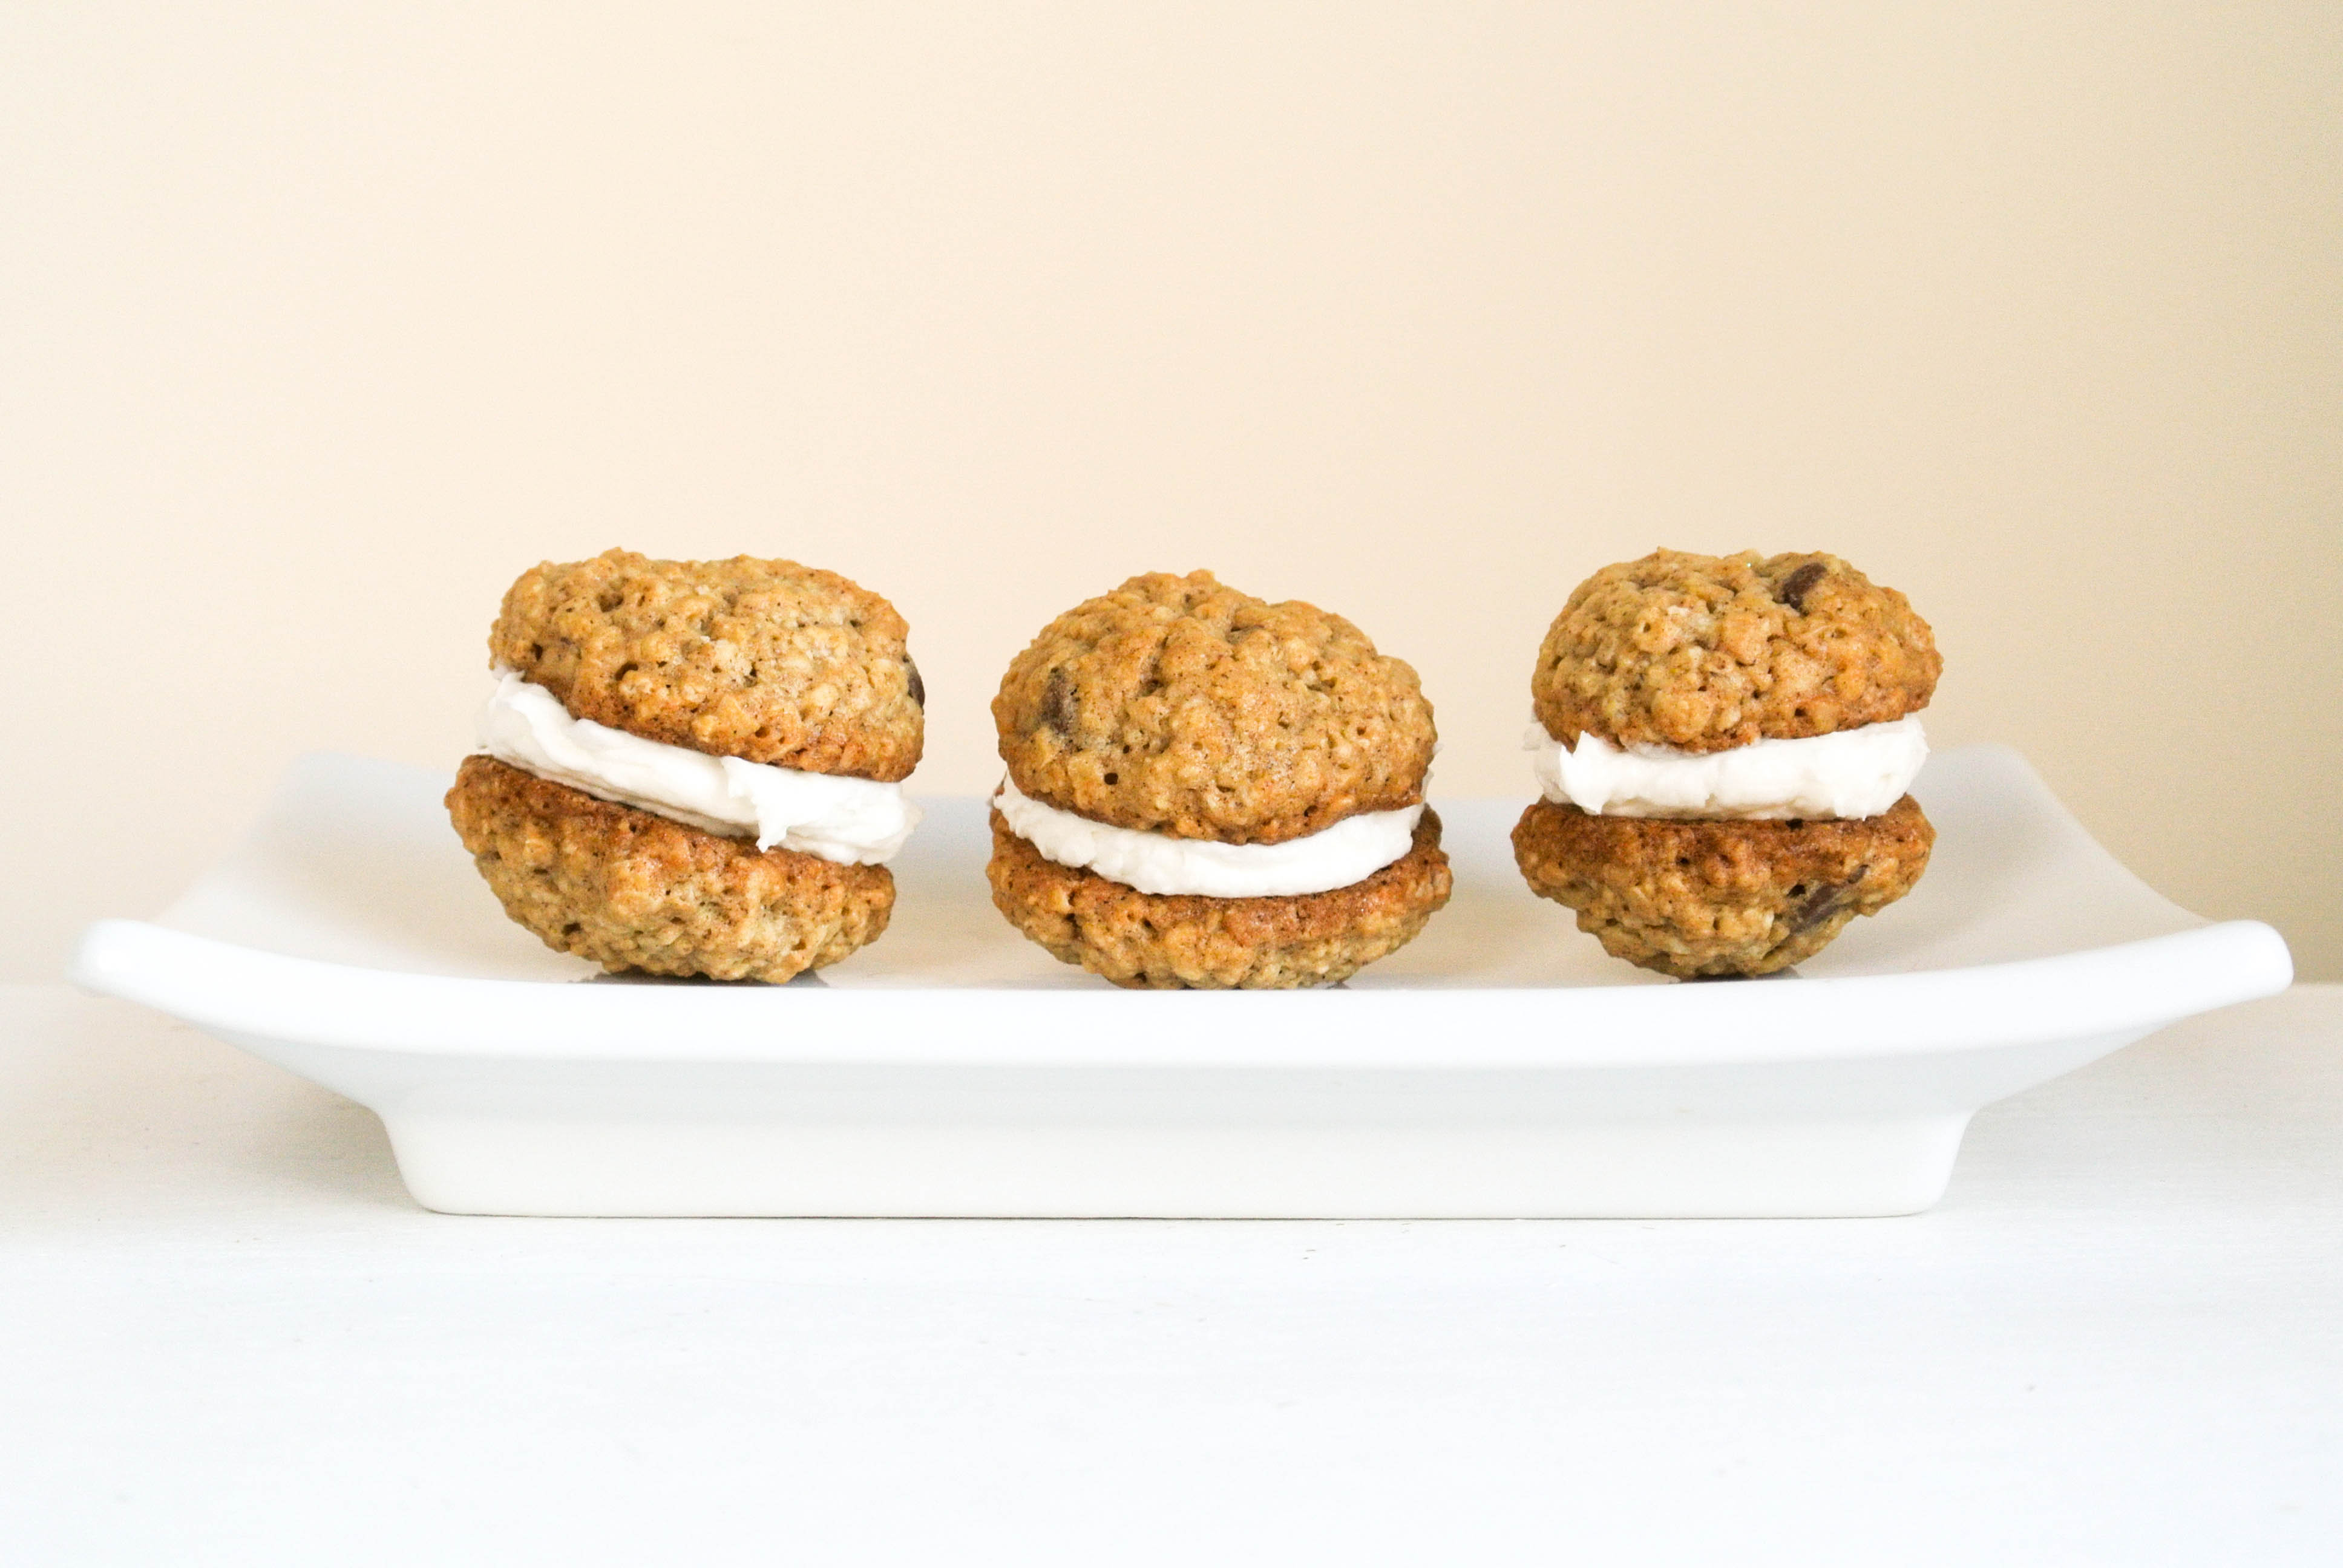 Oatmeal Chocolate Chip Sandwich Cookies with Creme Filling